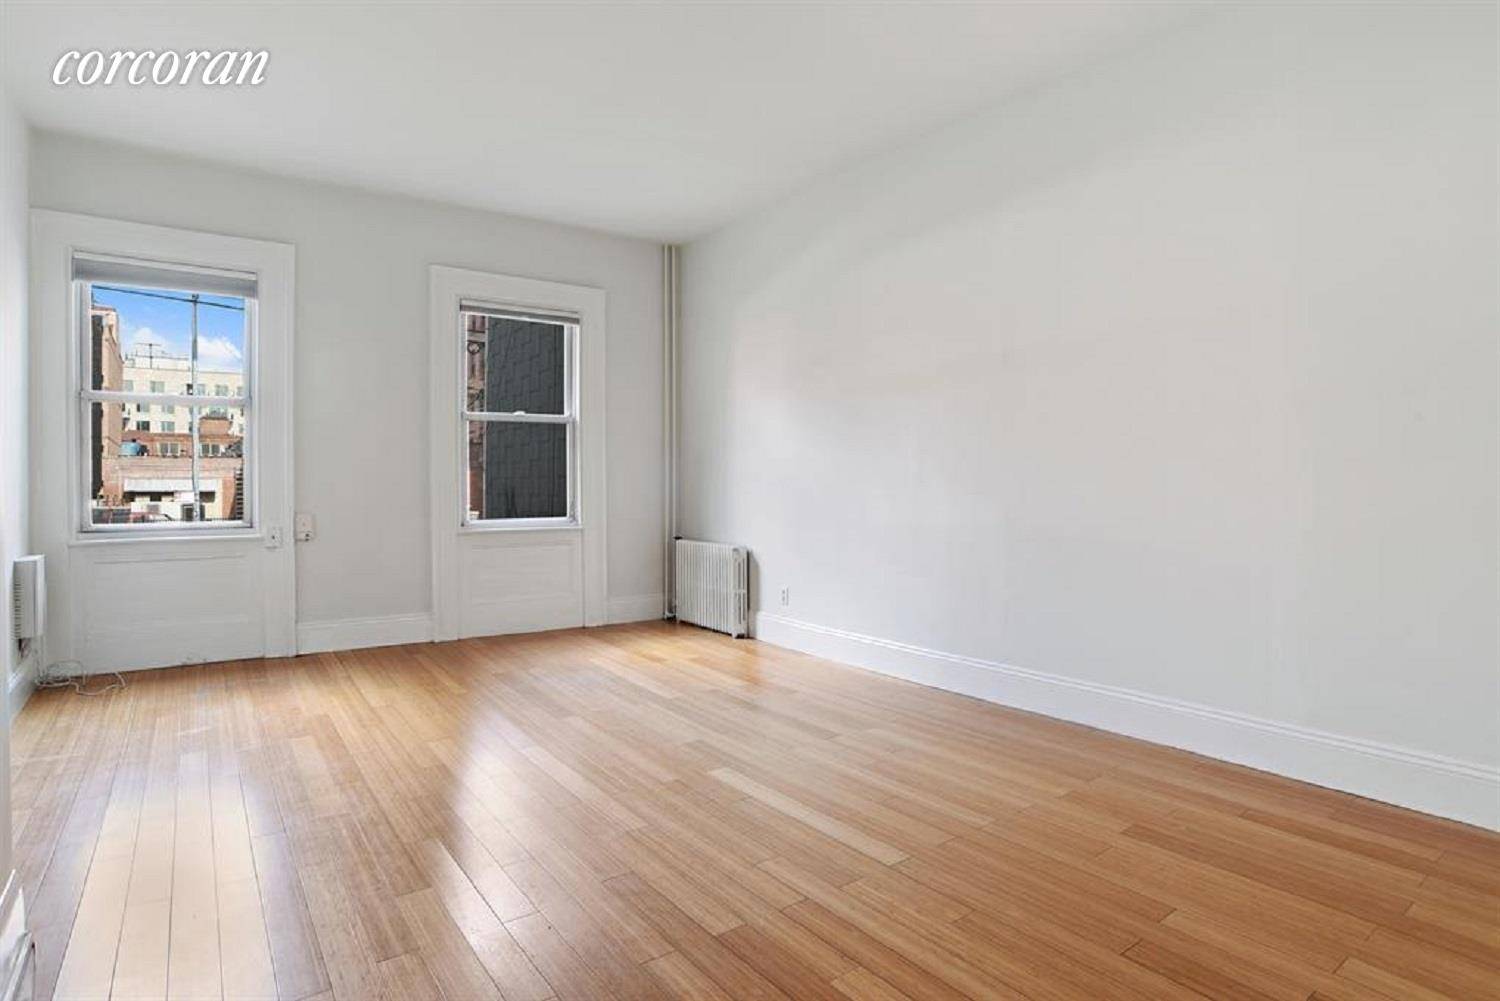 Look no further ! This perfect 2 bedroom 1 bathroom floor through apartment is now available in Prime Williamsburg !